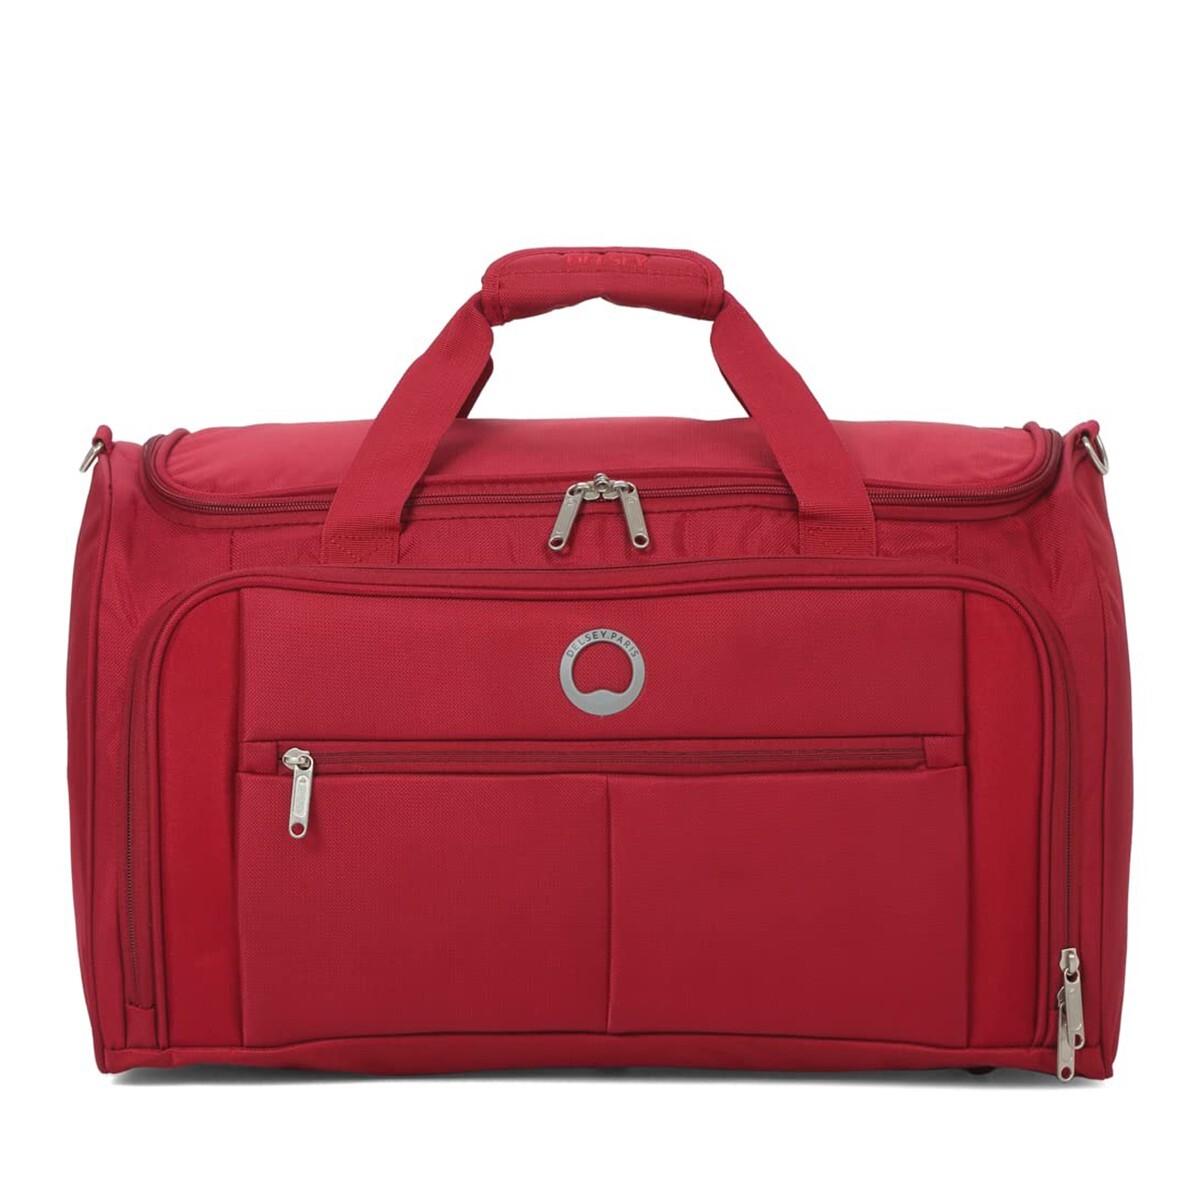 Delsey Duffle Bag Pin Up-5 50cm-Red